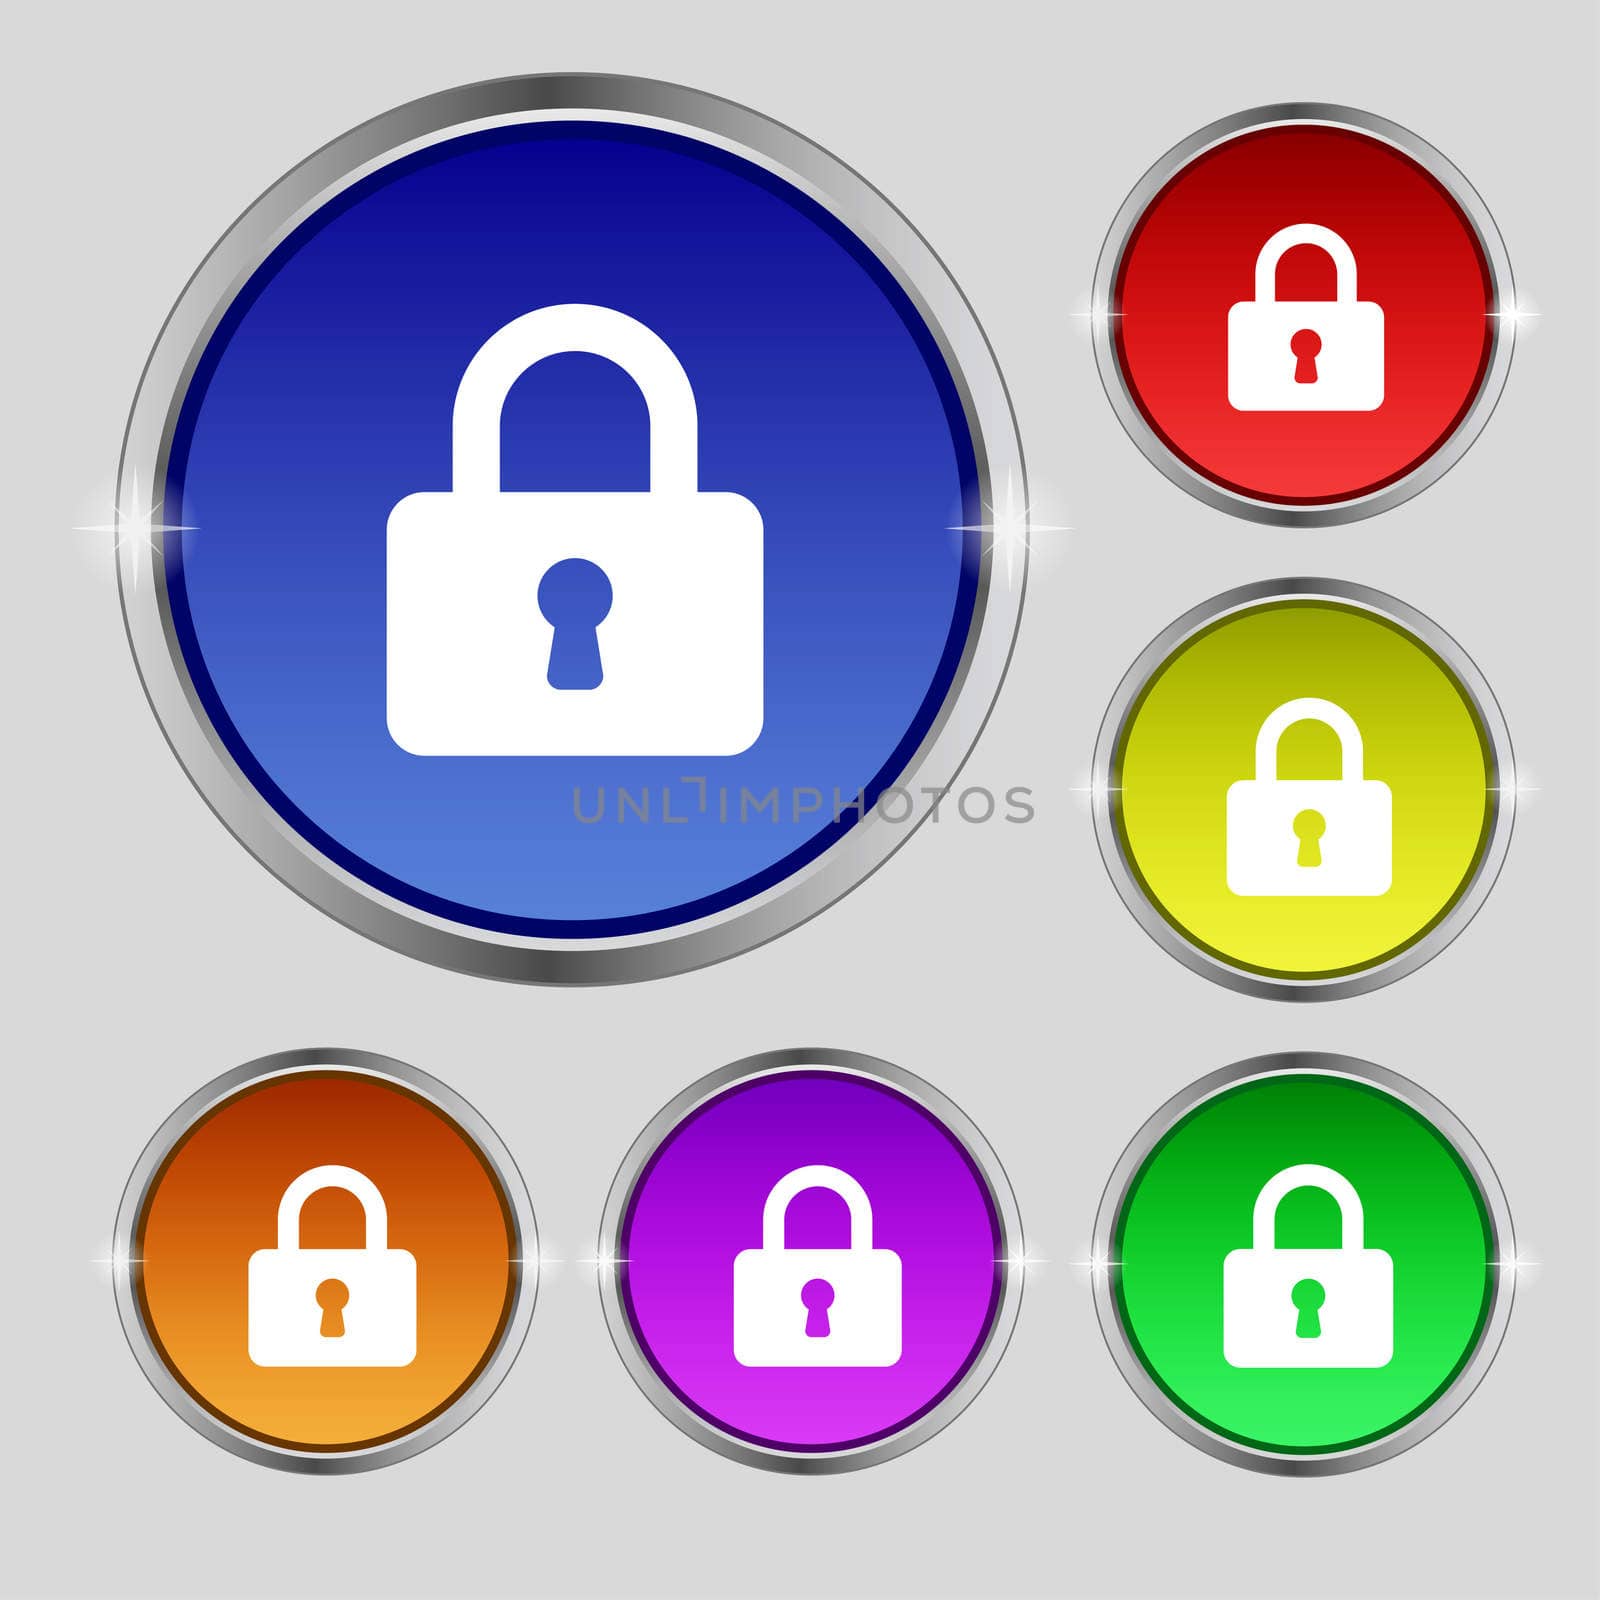 Pad Lock icon sign. Round symbol on bright colourful buttons. illustration